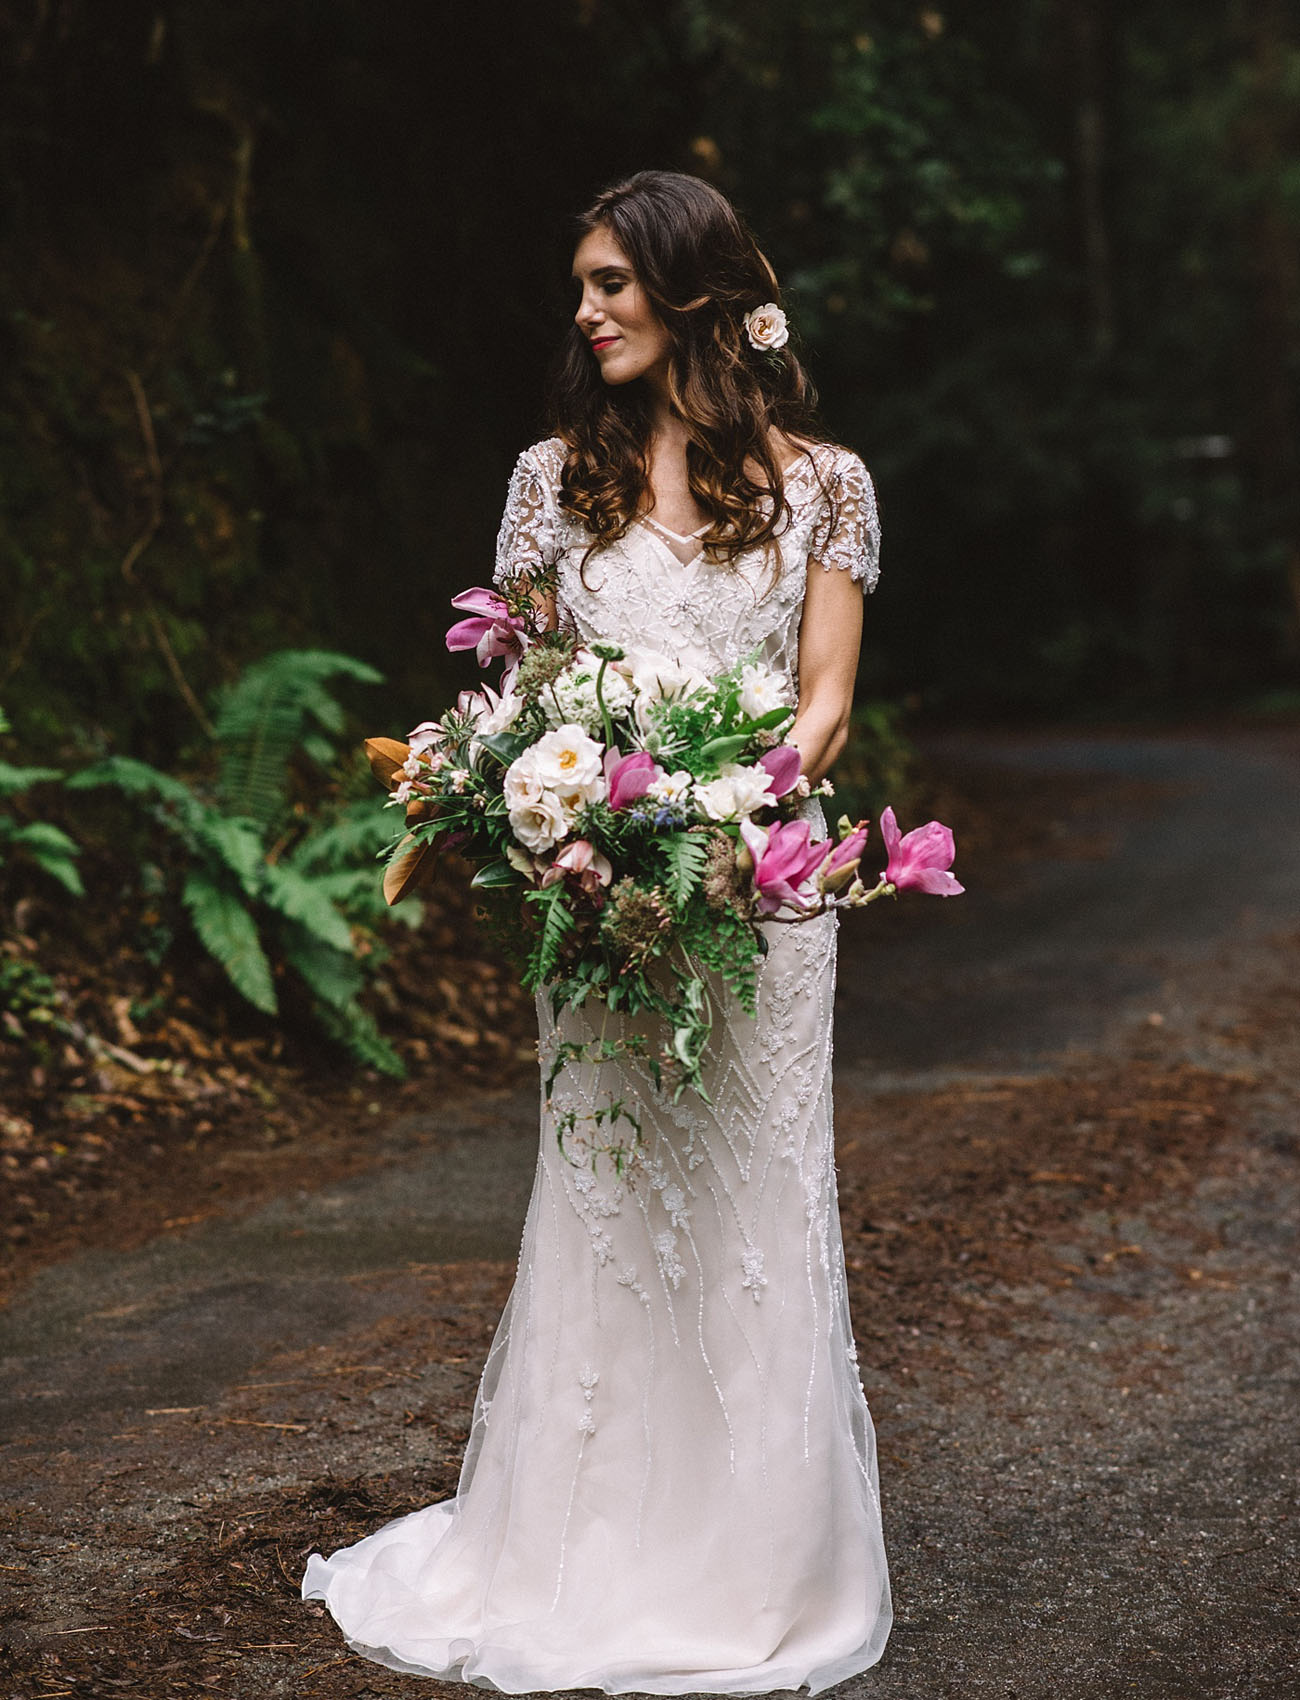 The bride is rocking a gorgeous BHLDN wedding dress, with intricate silver embroidery